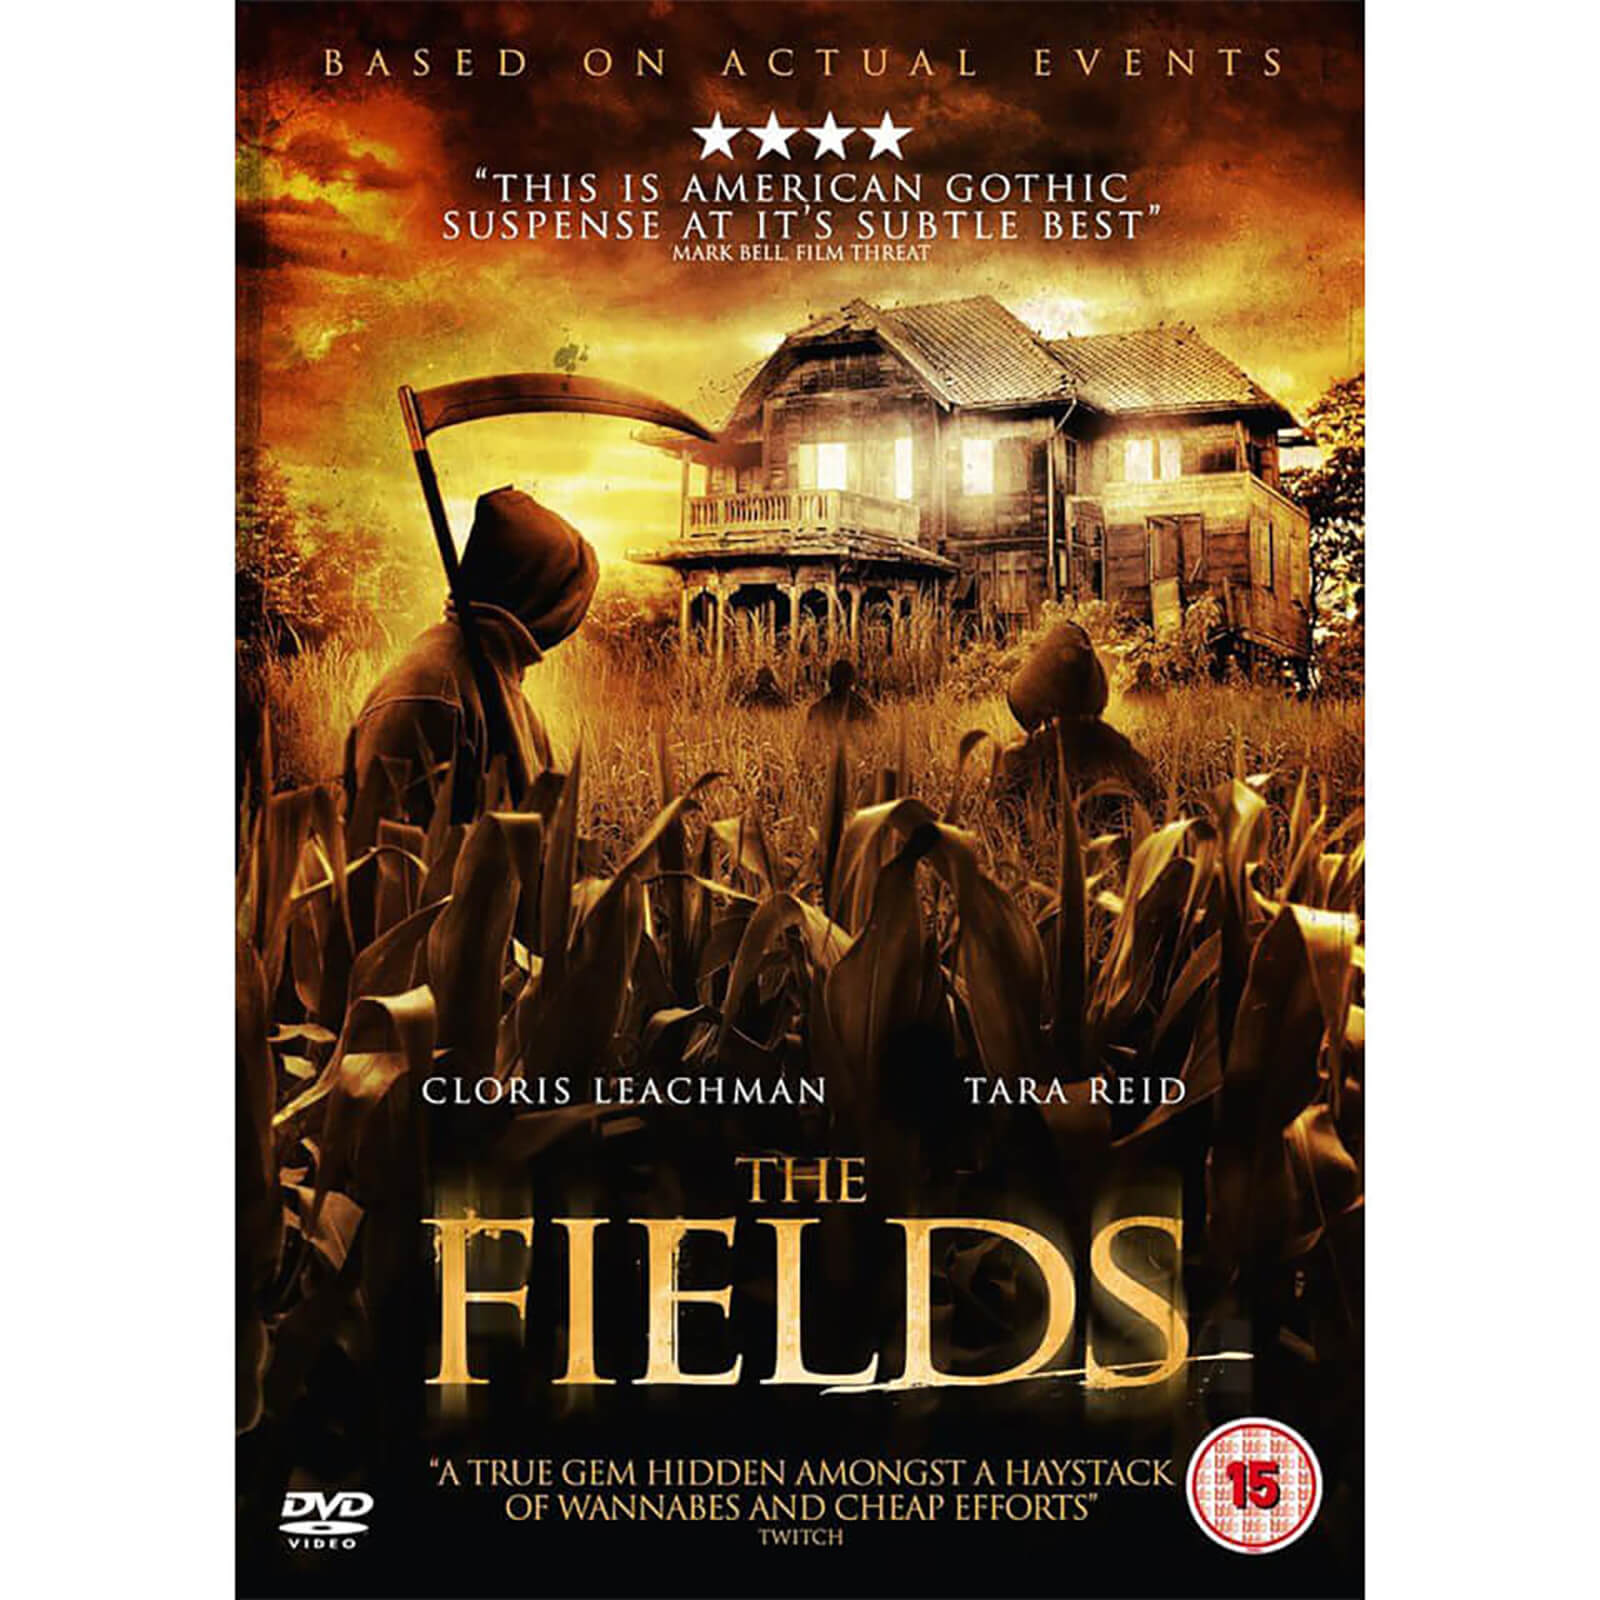 The fields 2011 poster. The fields 2011 DVD Cover.